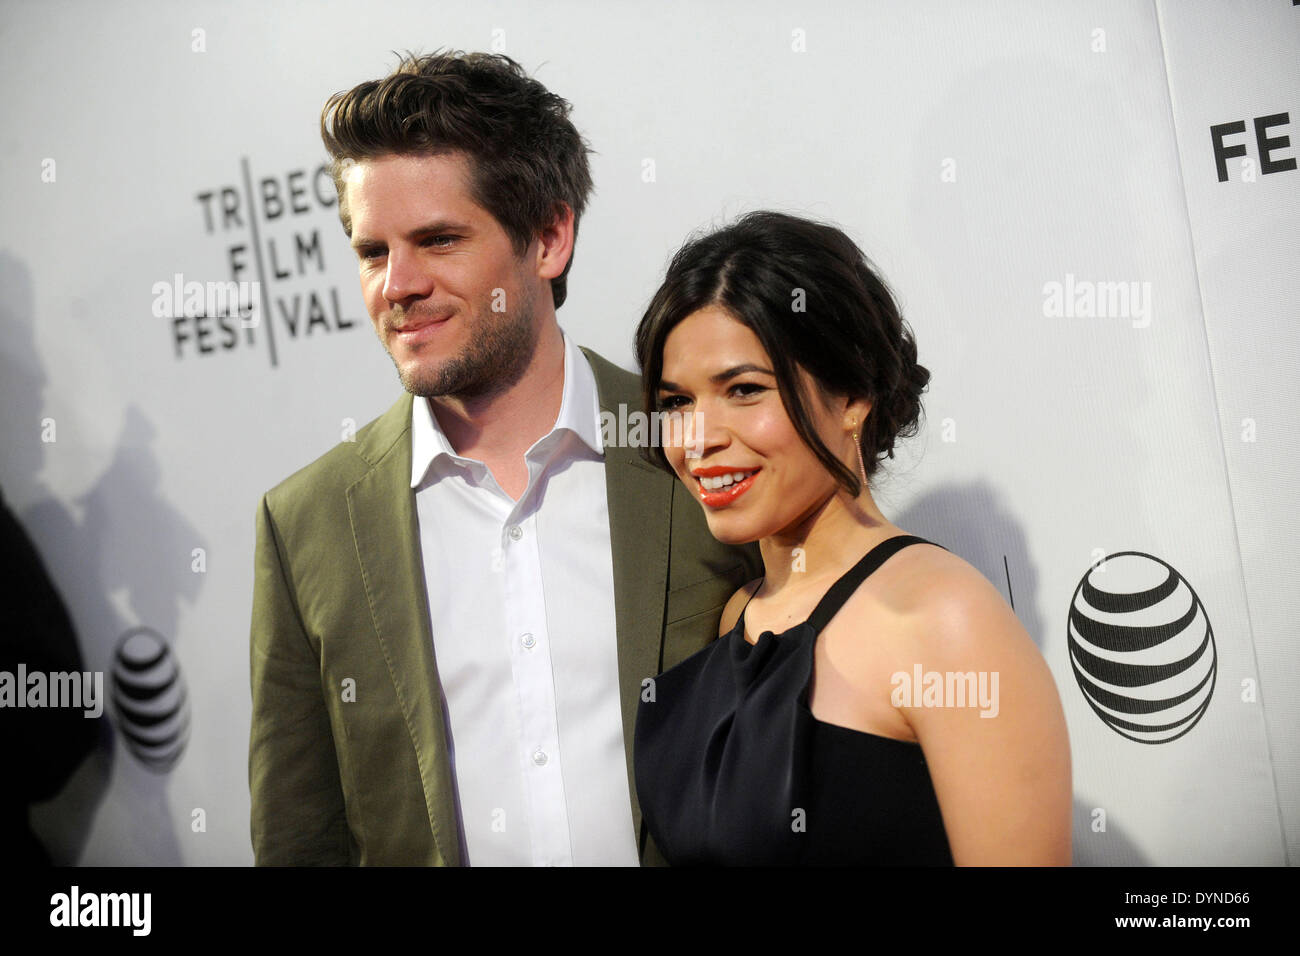 Director Ryan Piers Williams And Actress America Ferrera Attend The Screening Of X Y During The 14 Tribeca Film Festival At Bmcc Tribeca Pac On April 19 14 In New York City Picture Alliance